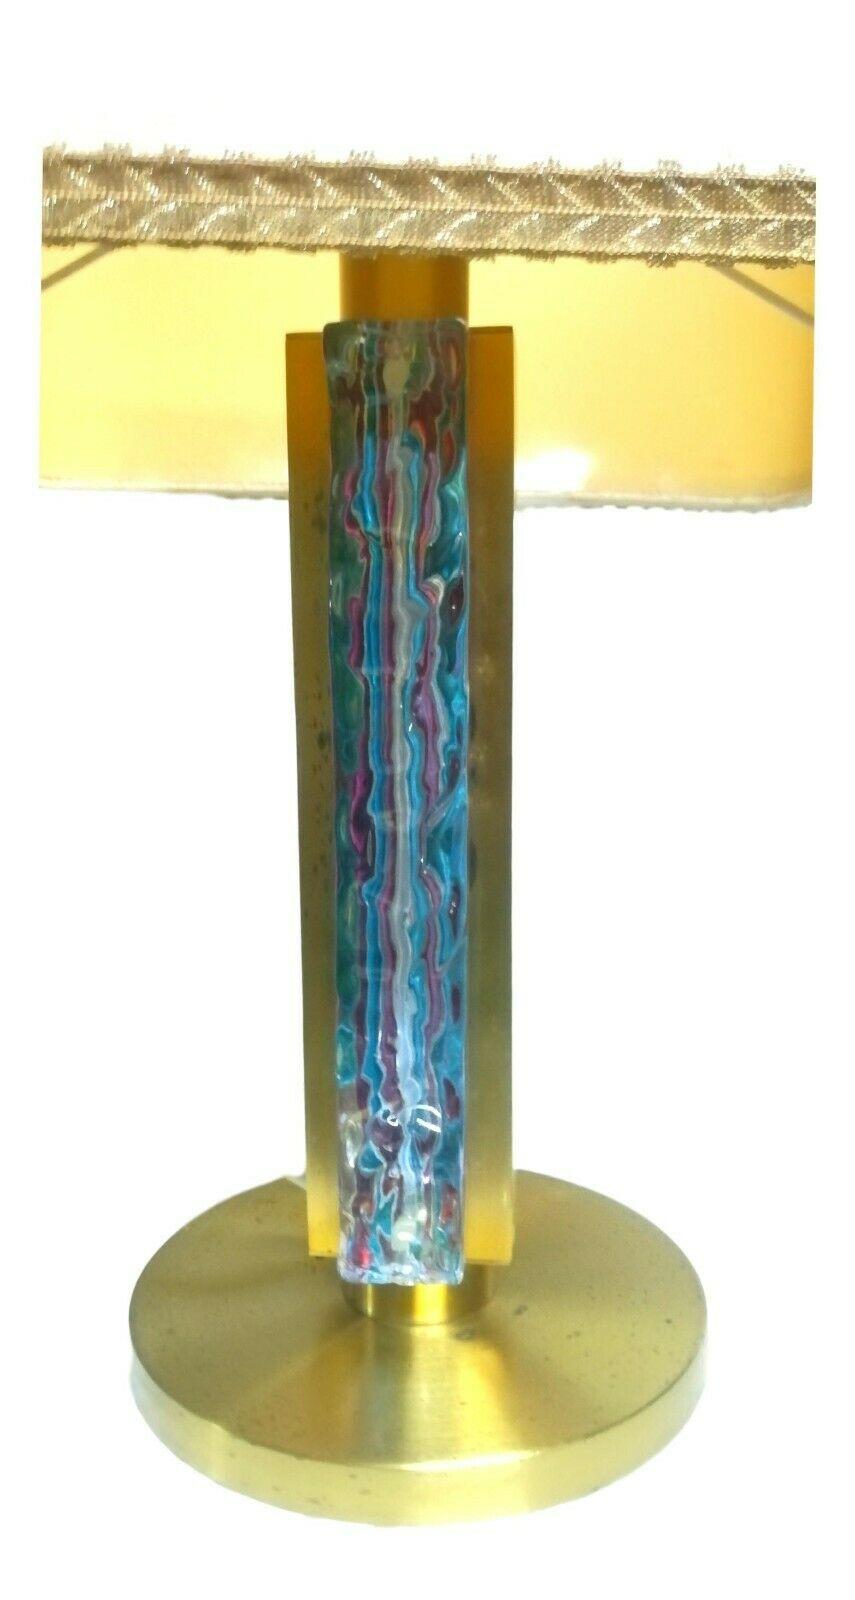 Table lamp made by esperia , designed by angelo brottomurano worked and multicolored in shades of blue

It measures approximately 60 cm in overall height, the hat 36x36 cm

Very good condition, as shown in photos, intact and perfect glass,